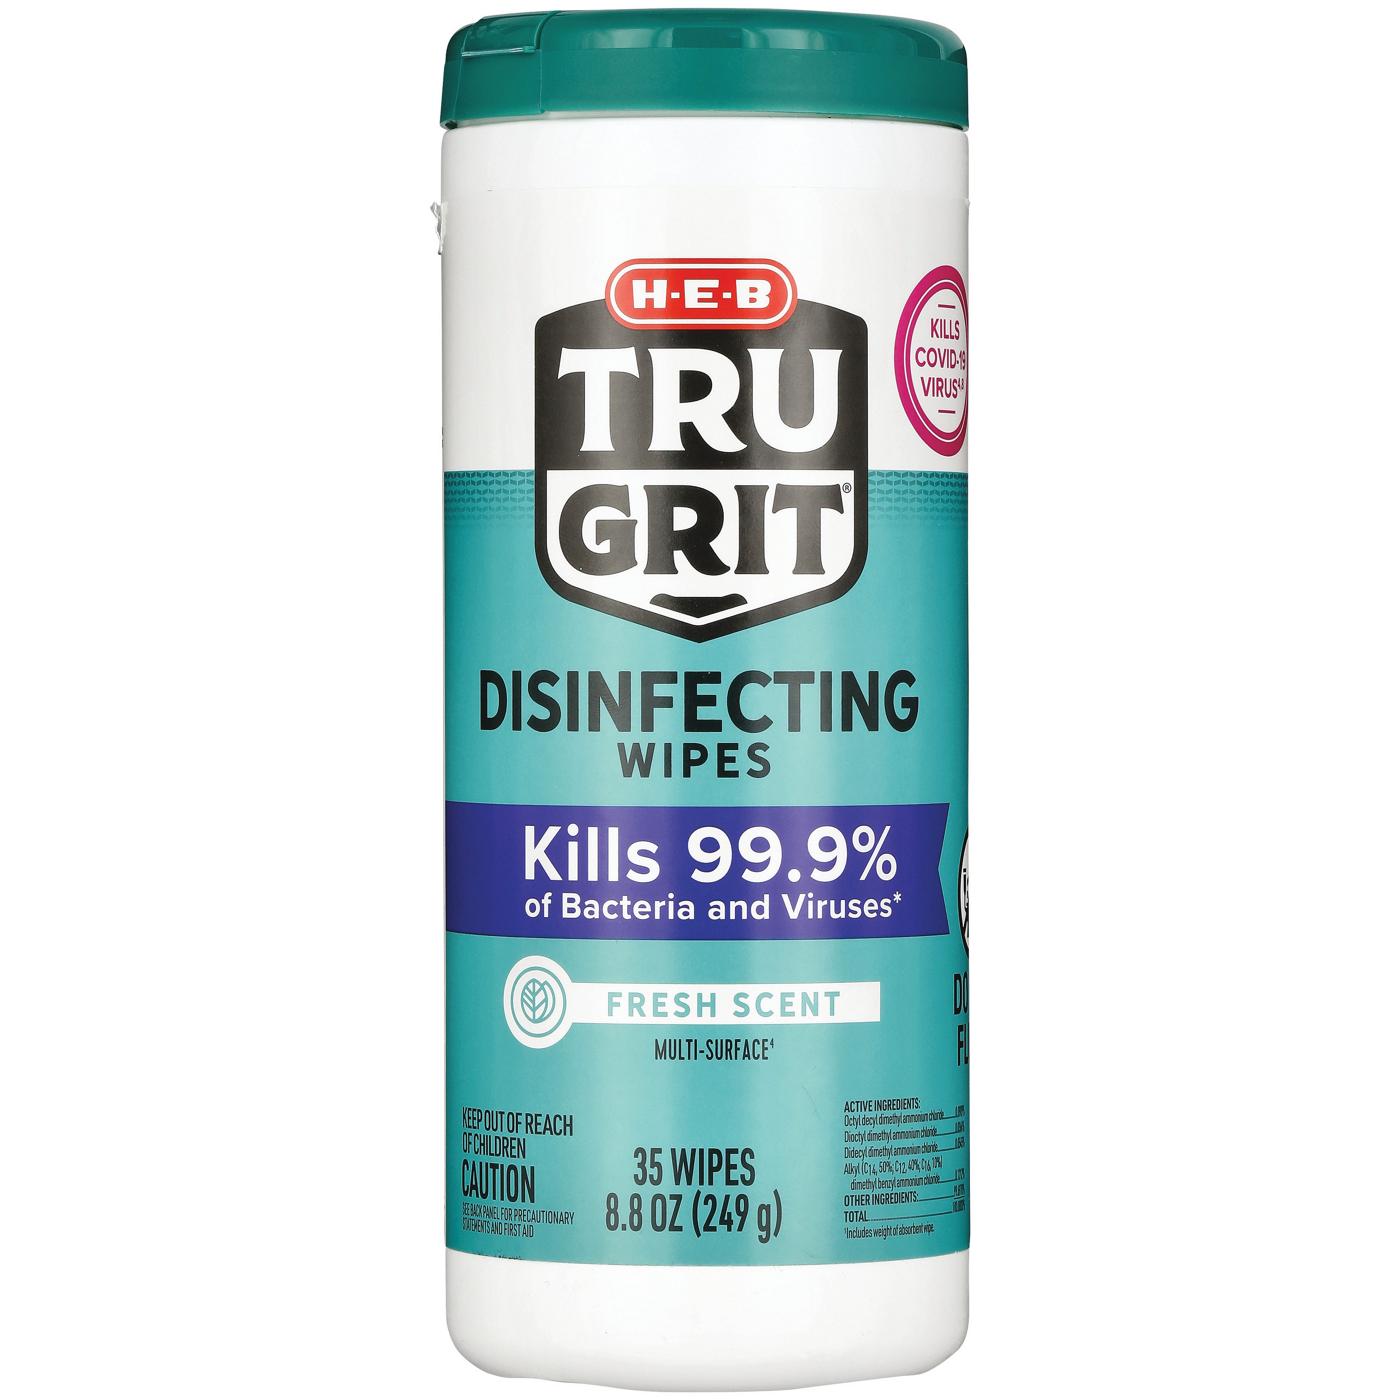 H-E-B Tru Grit Disinfecting Wipes – Fresh Scent; image 1 of 2